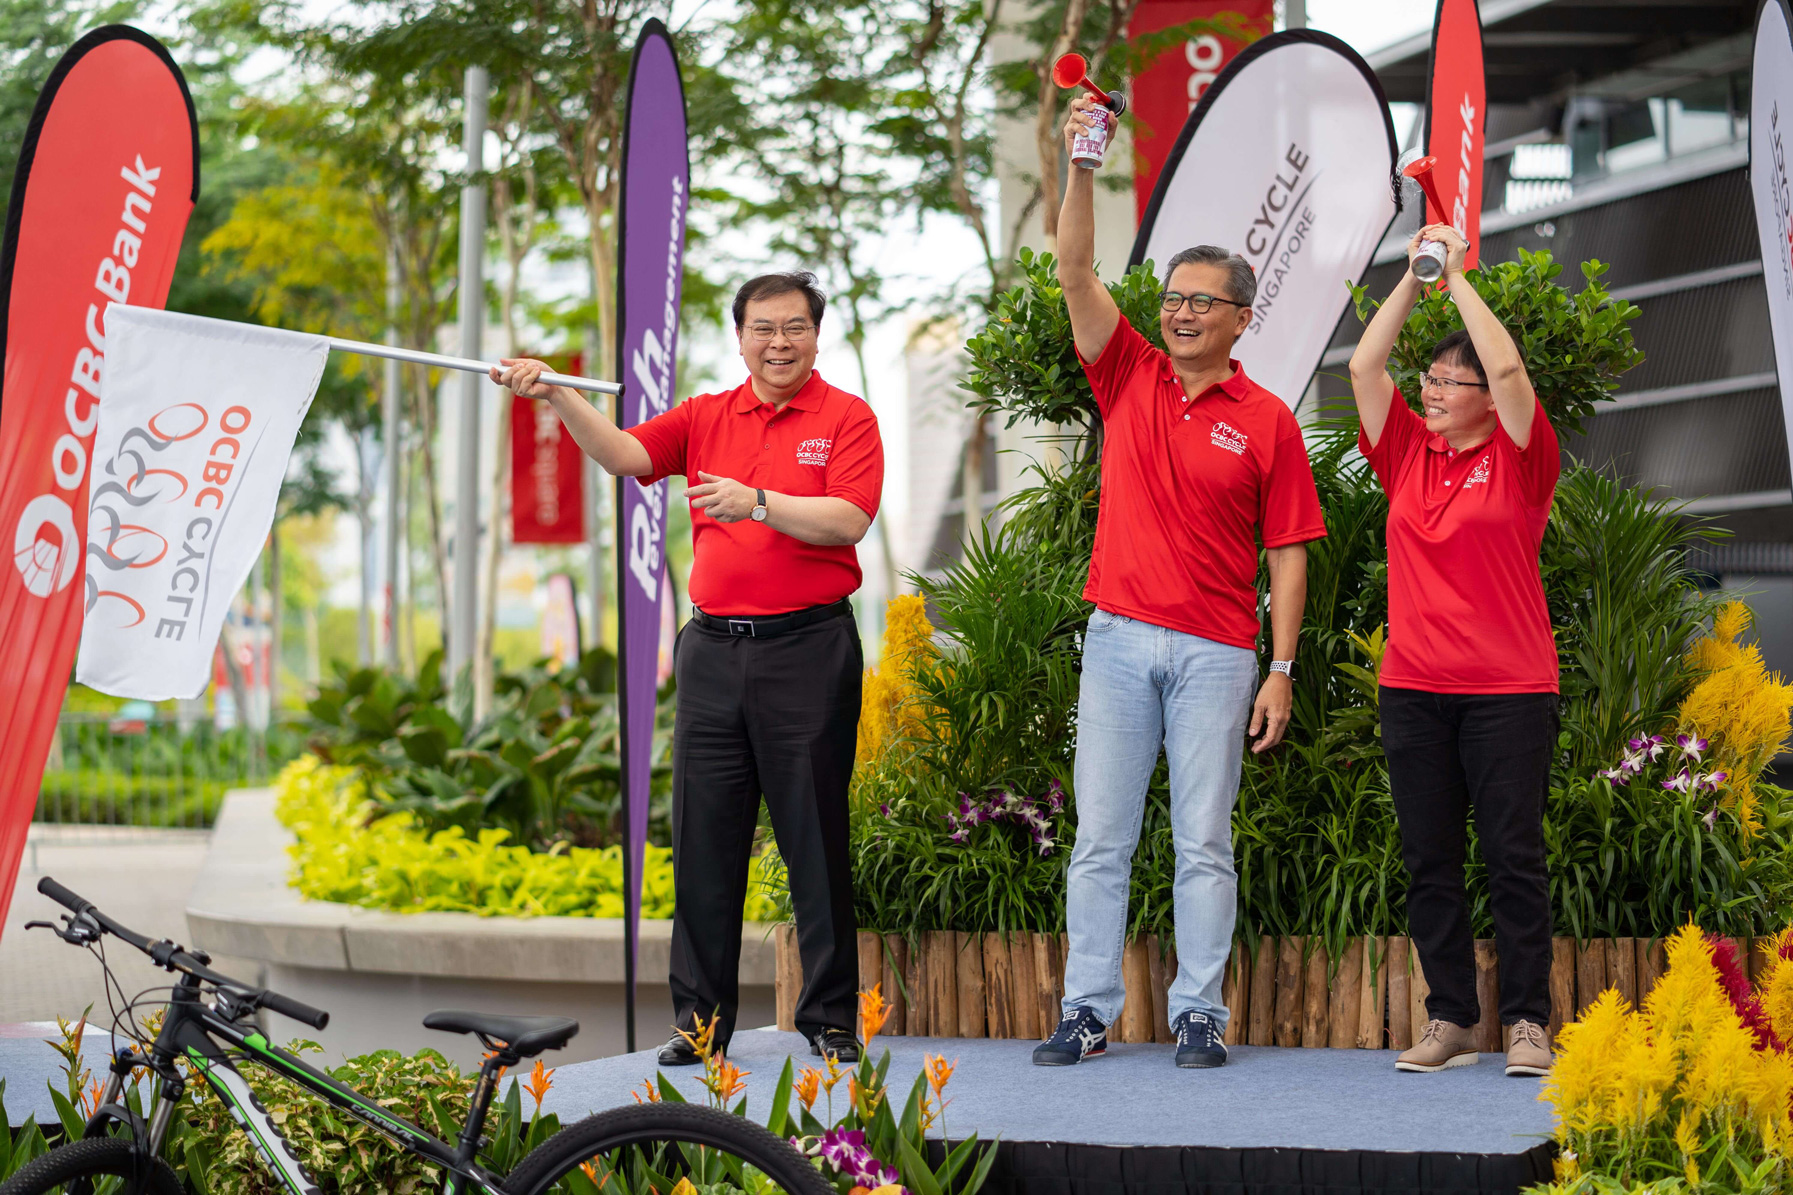 /assets/images/media/2020/OCBC Cycle 2020 Launch Pic 1.jpg